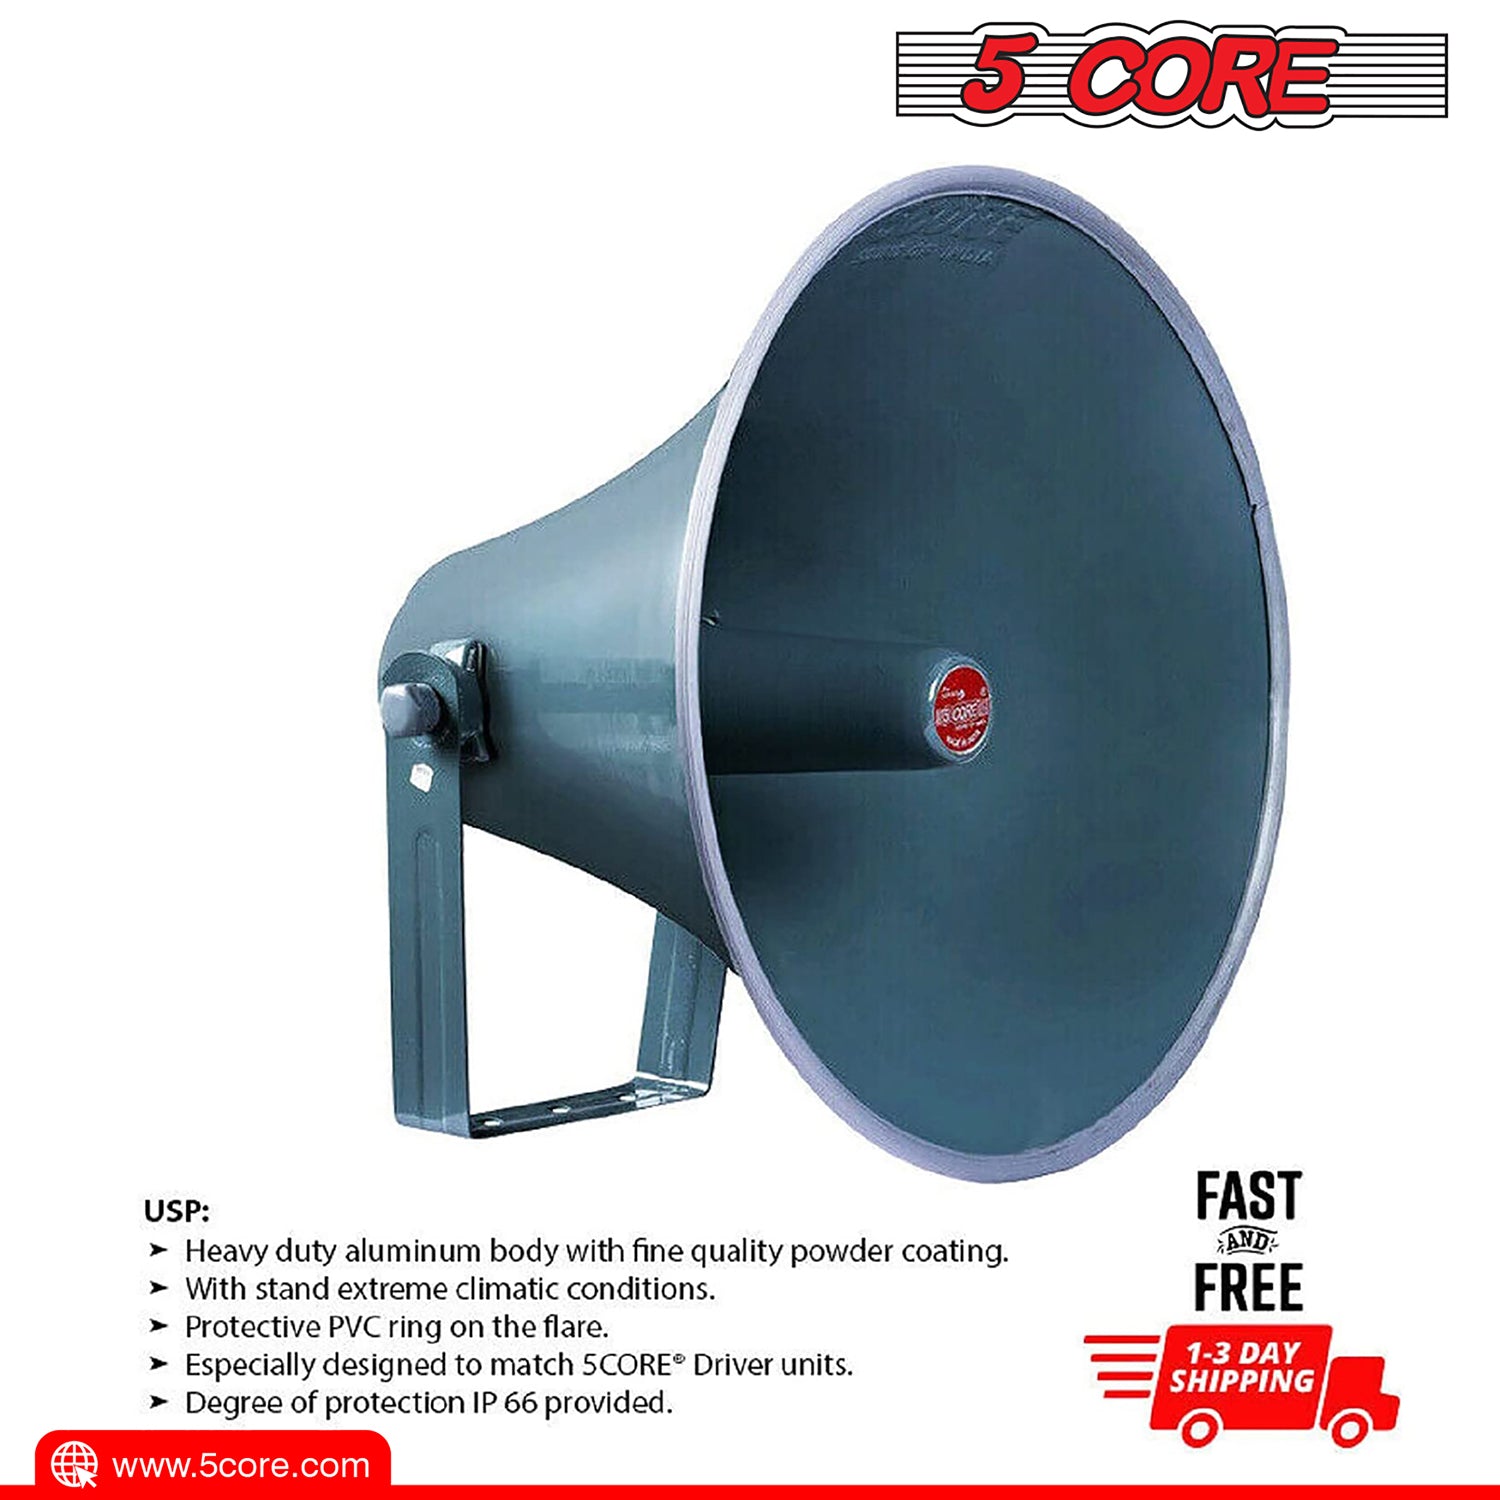 5 Core PA Horn Speaker  400W PMPO Compression Driver in 16 Inch Throat  Mounting Bracket Included